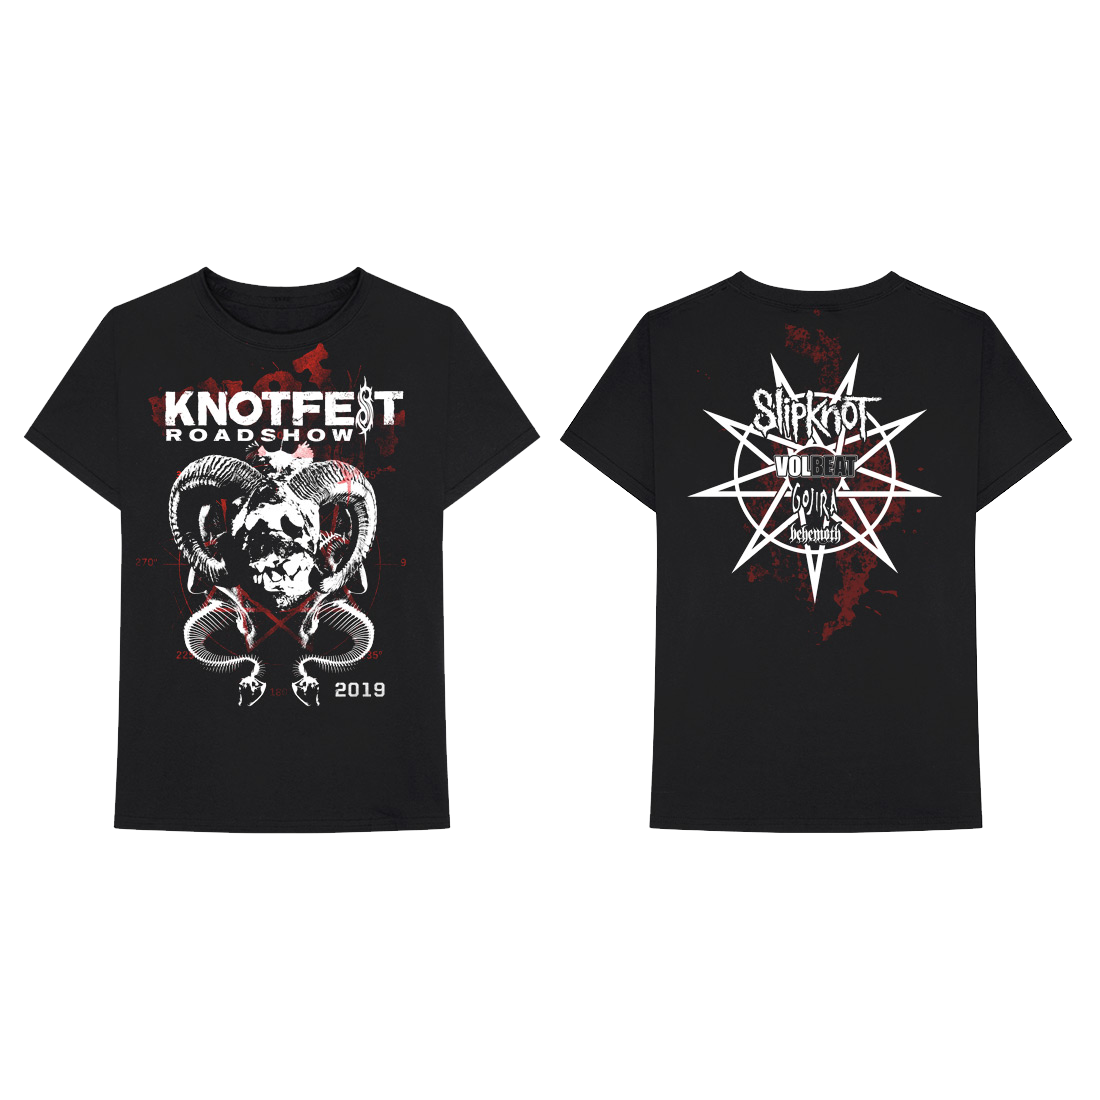 Merch Drop: New Knotfest Roadshow gear is now available